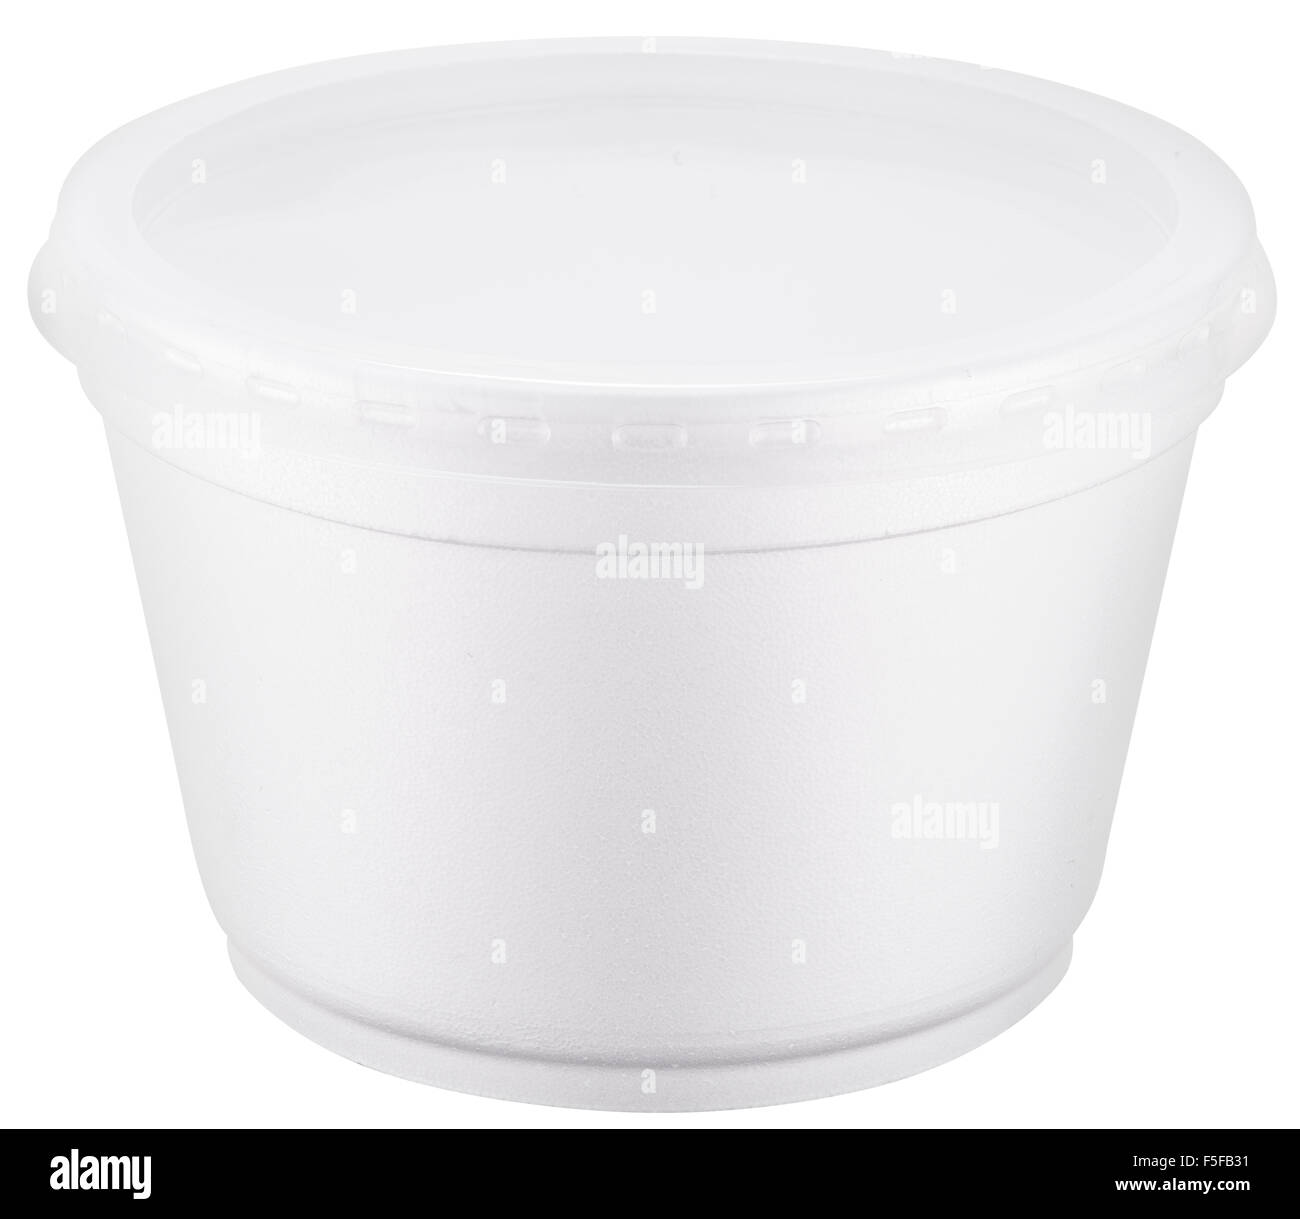 White polystyrene cup. File contains clipping paths. Stock Photo